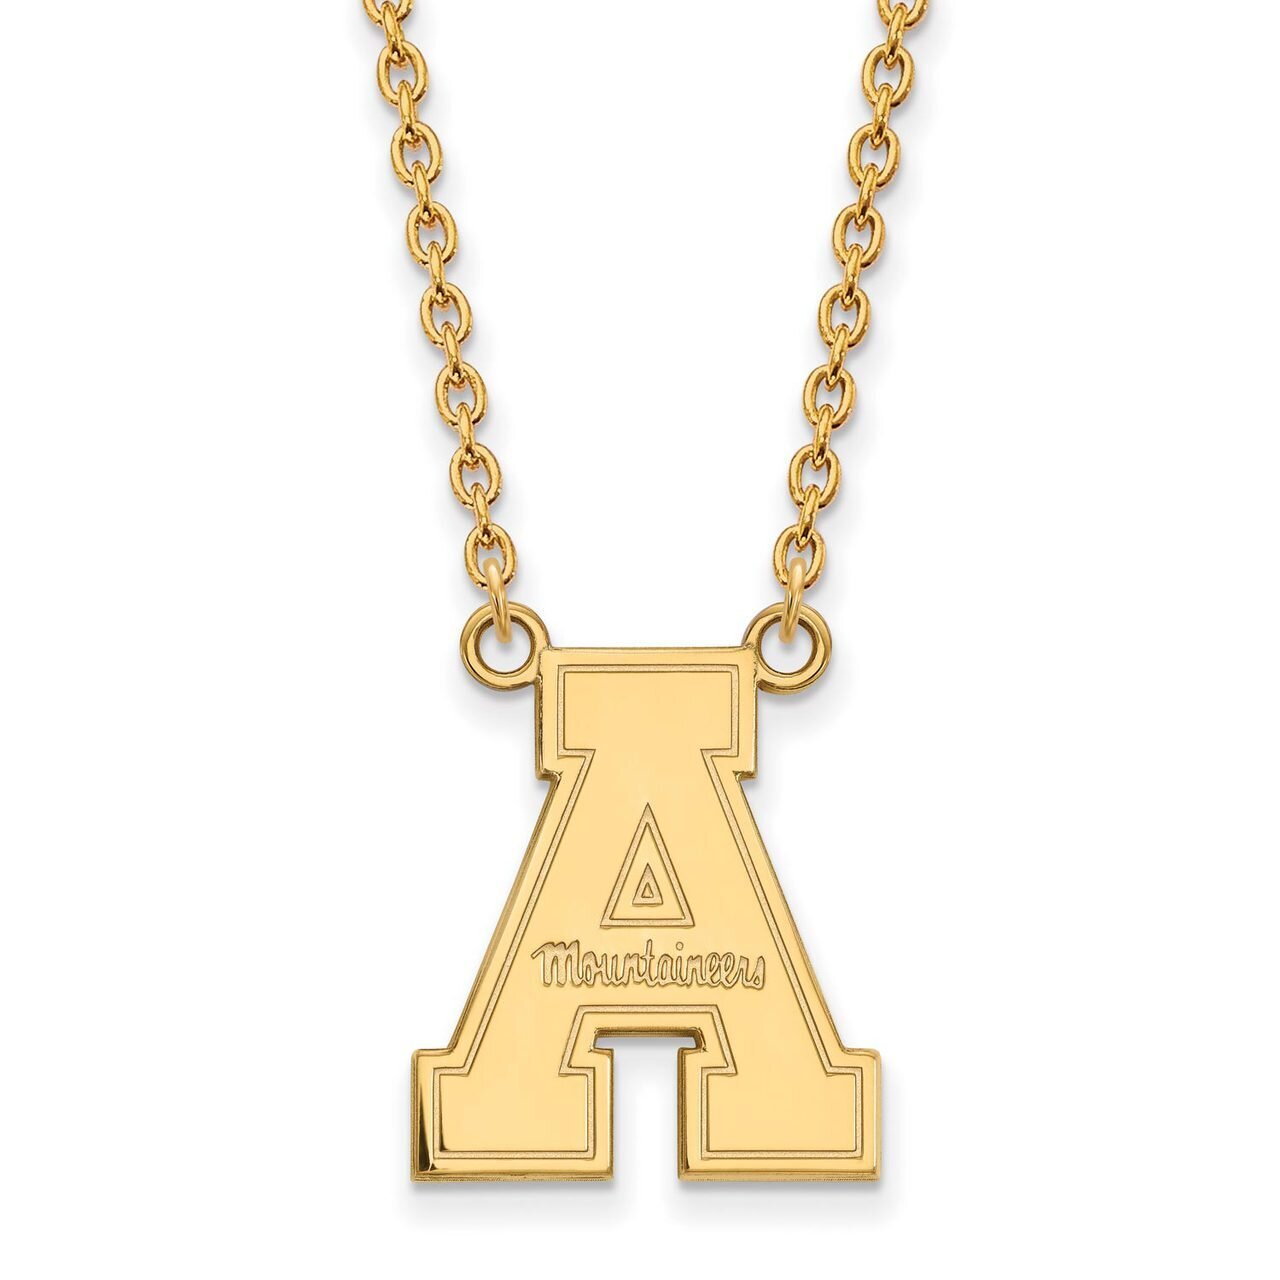 Appalachian State University Large Pendant with Chain Necklace 10k Yellow Gold 1Y012APS-18